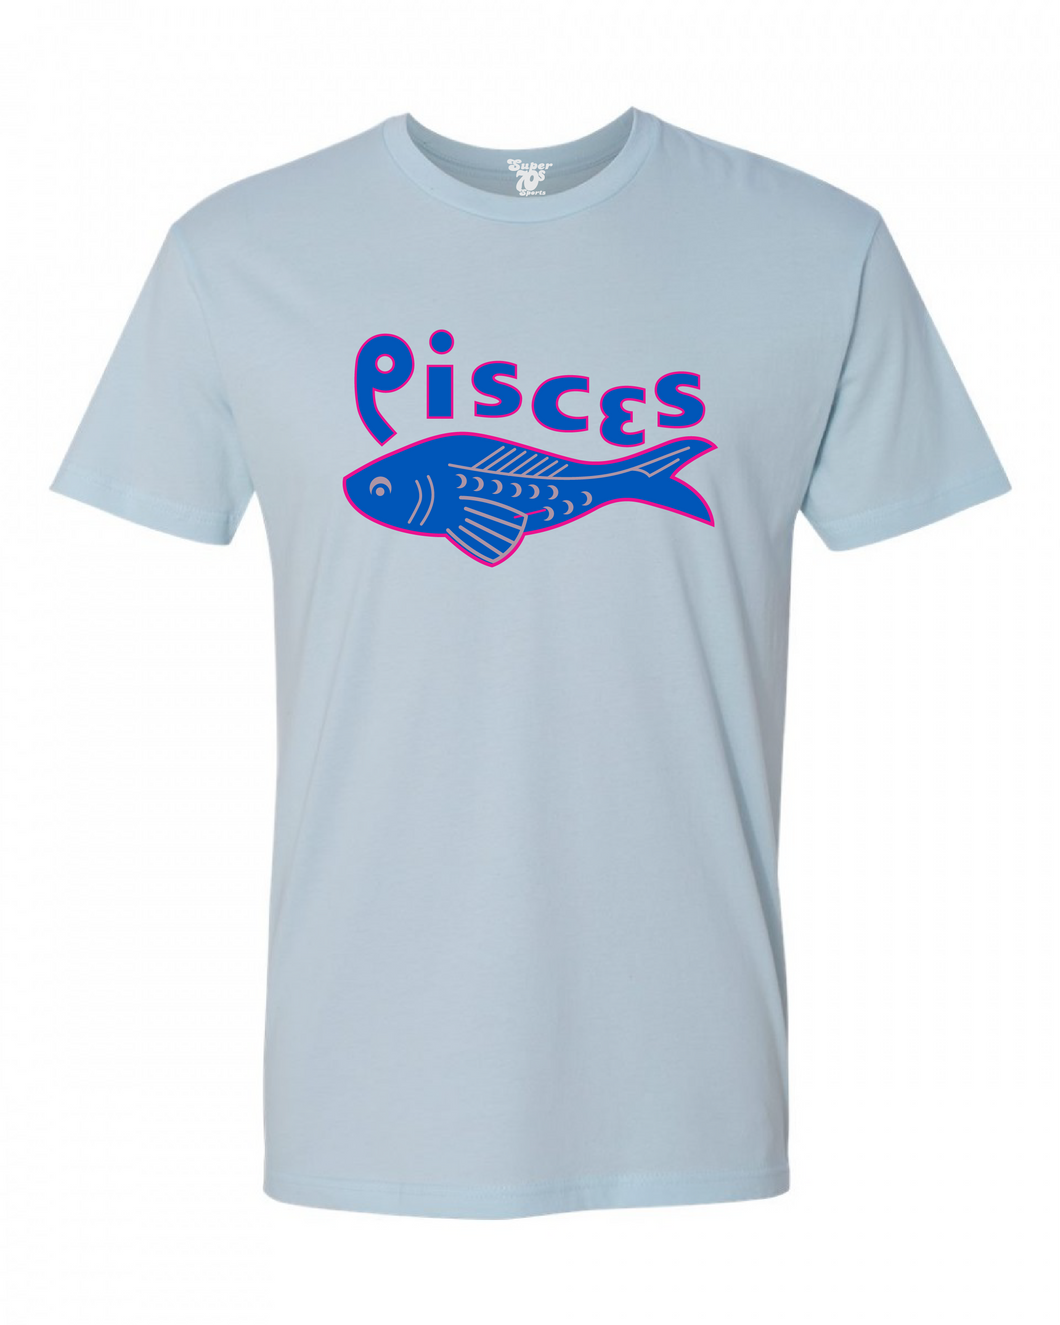 Pittsburgh Pisces Tee